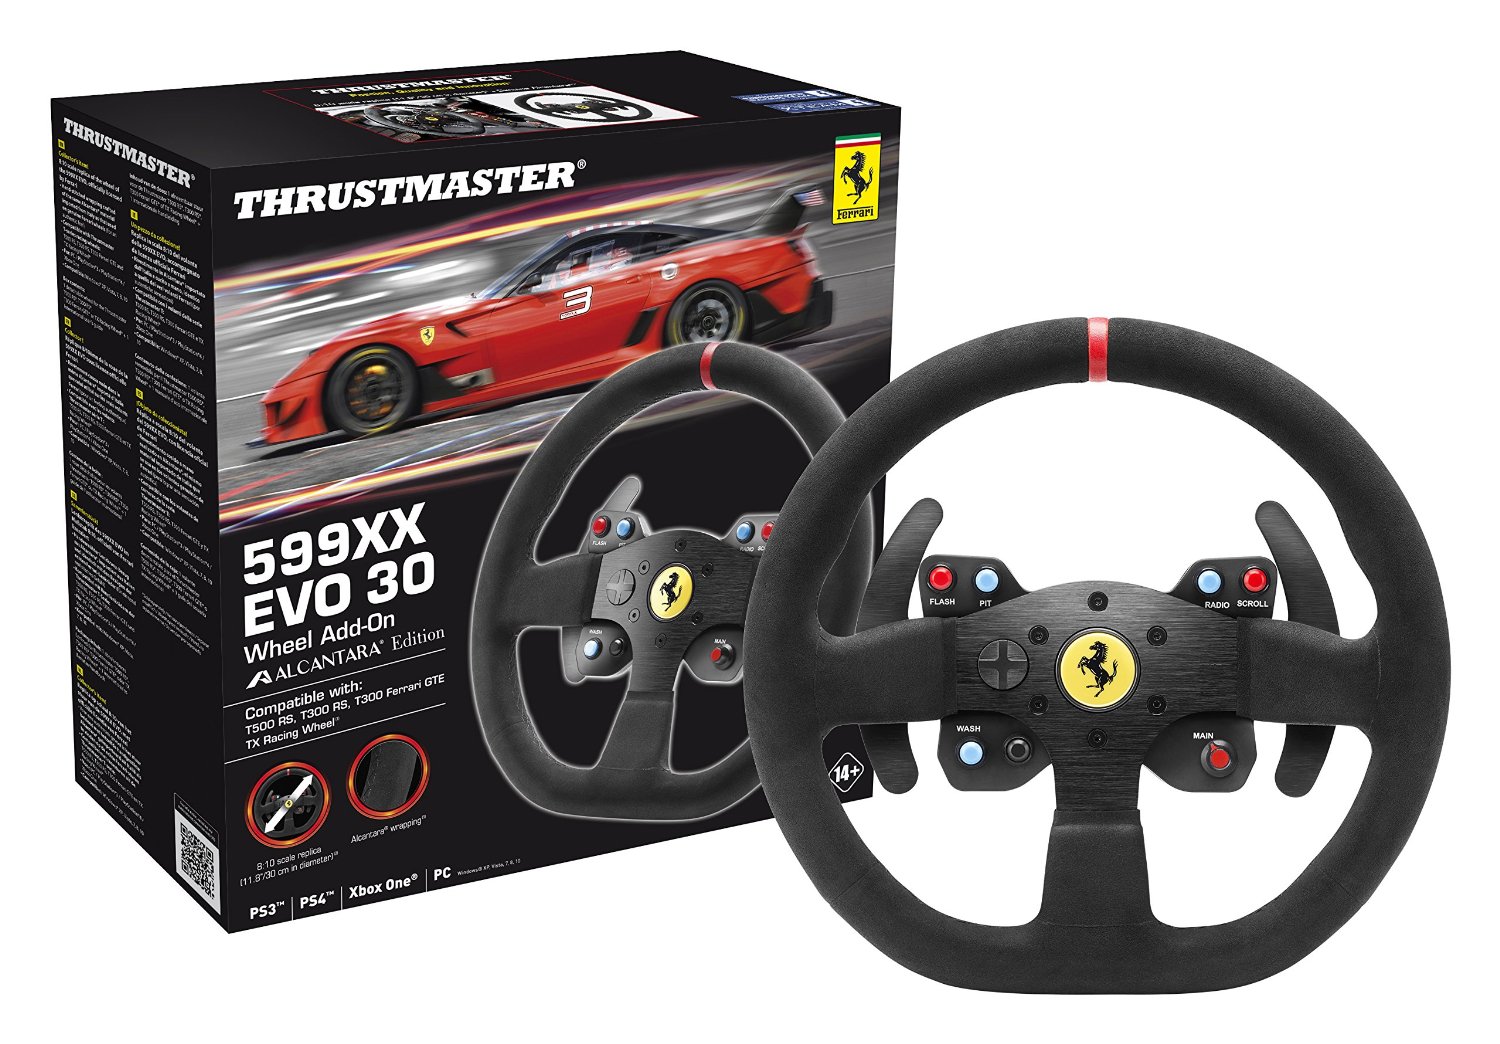 Details And Images For The Thrustmaster Vg Ferrari 599xx Evo